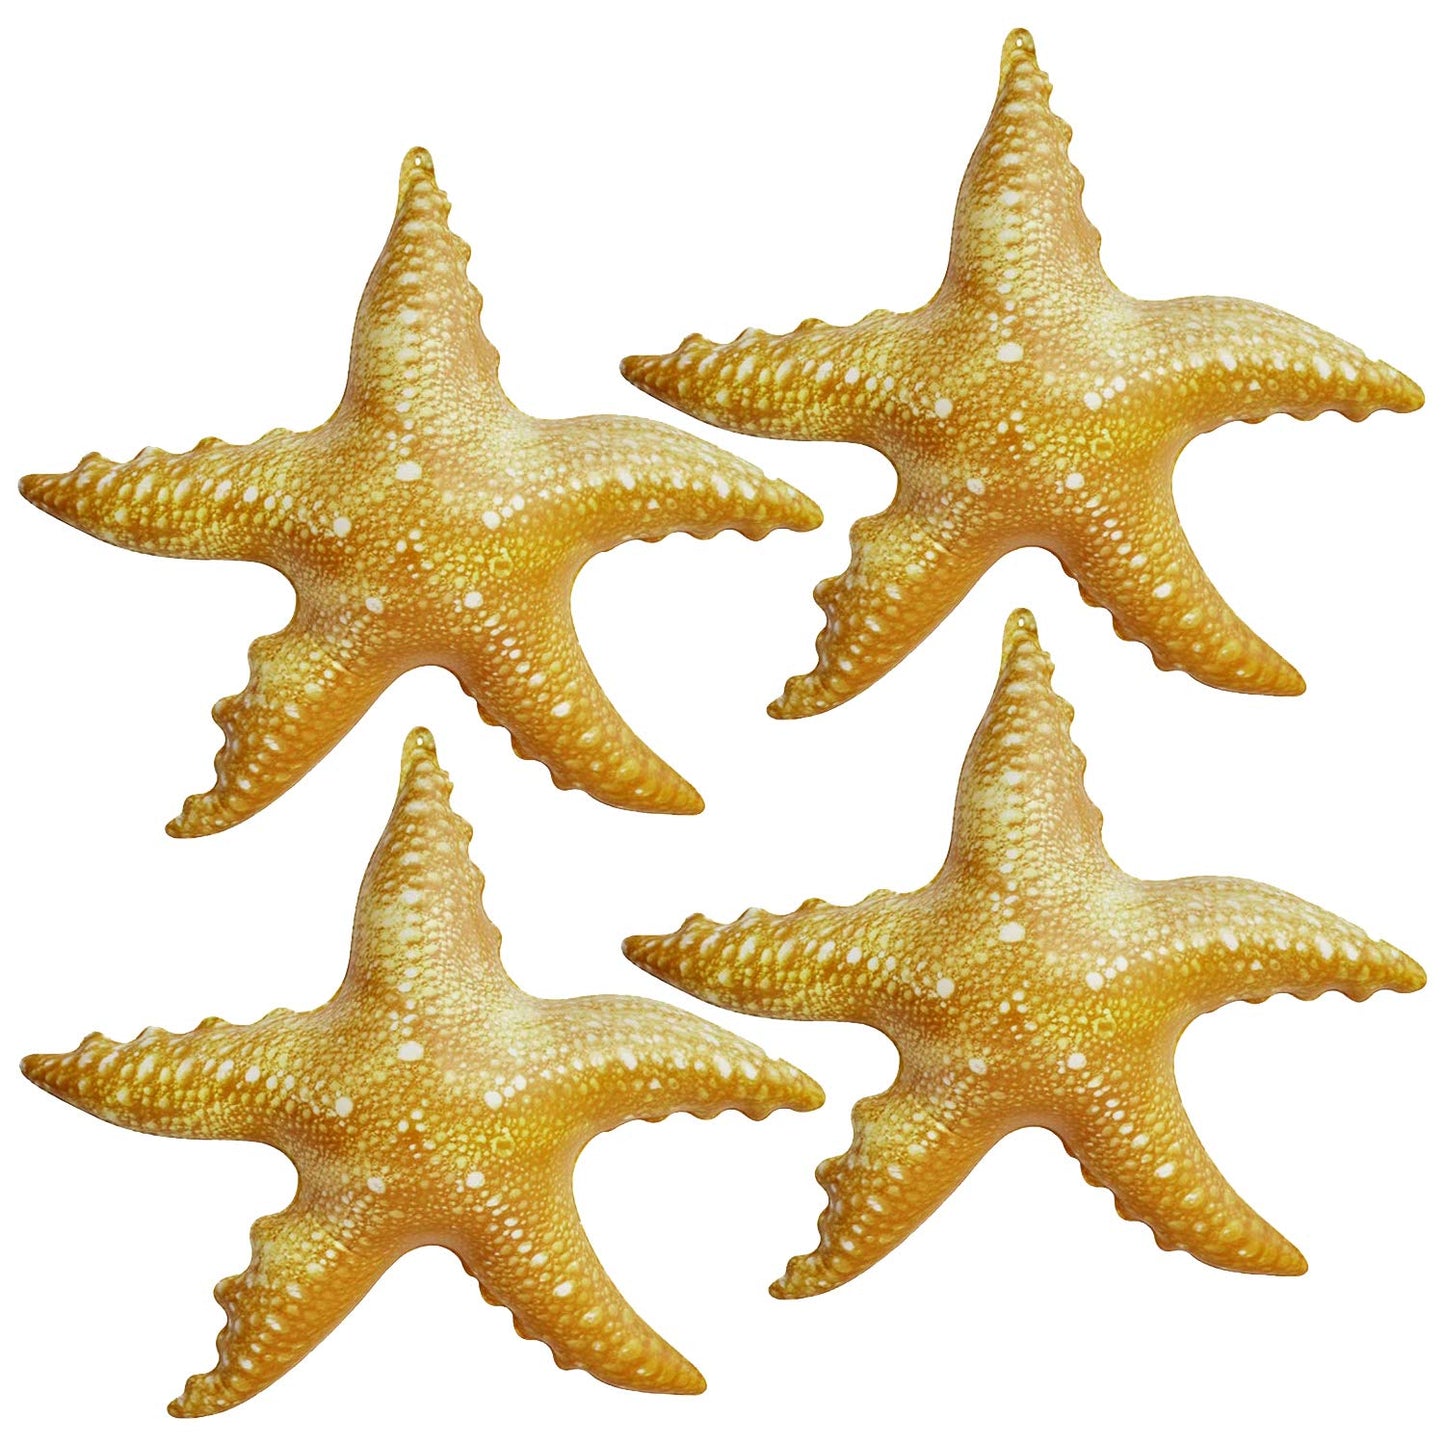 Jet Creations Inflatable Animals 20 inch Wide Pack of 4 Star Fish Party Pool Supplies Favors Birthday Gifts for Kids an-STAR4, Multi STARFISH